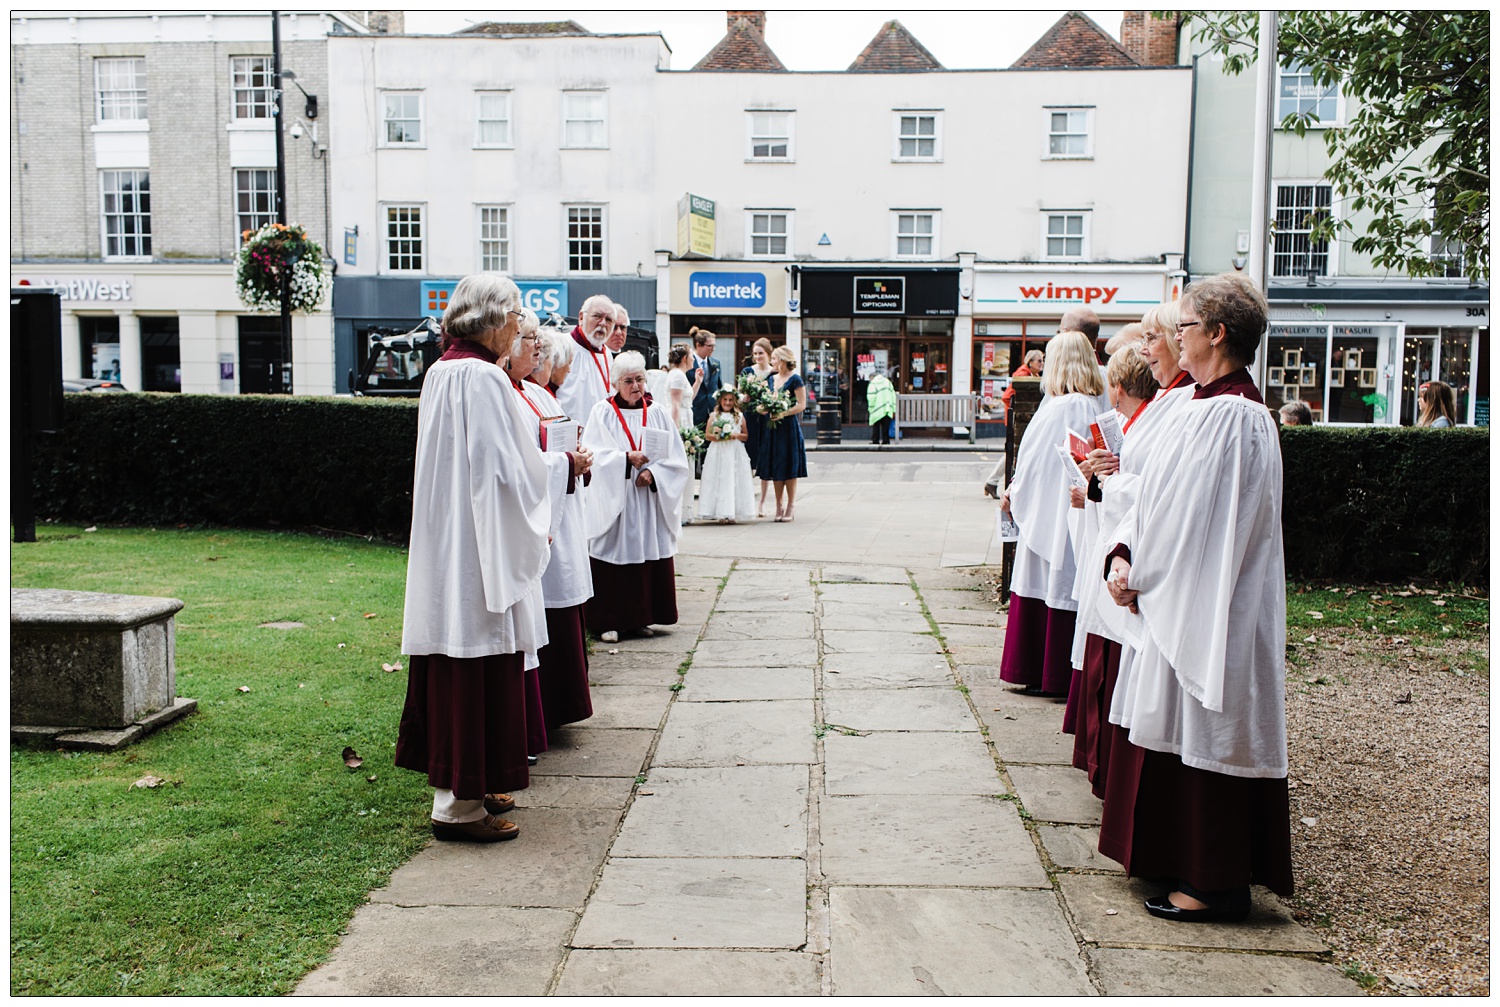 The choir line up outside All Saints with St Peter Church in Maldon. Waiting for the bride and bridesmaids to walk down the path. There is a Wimpy restaurant and opticians in the background.